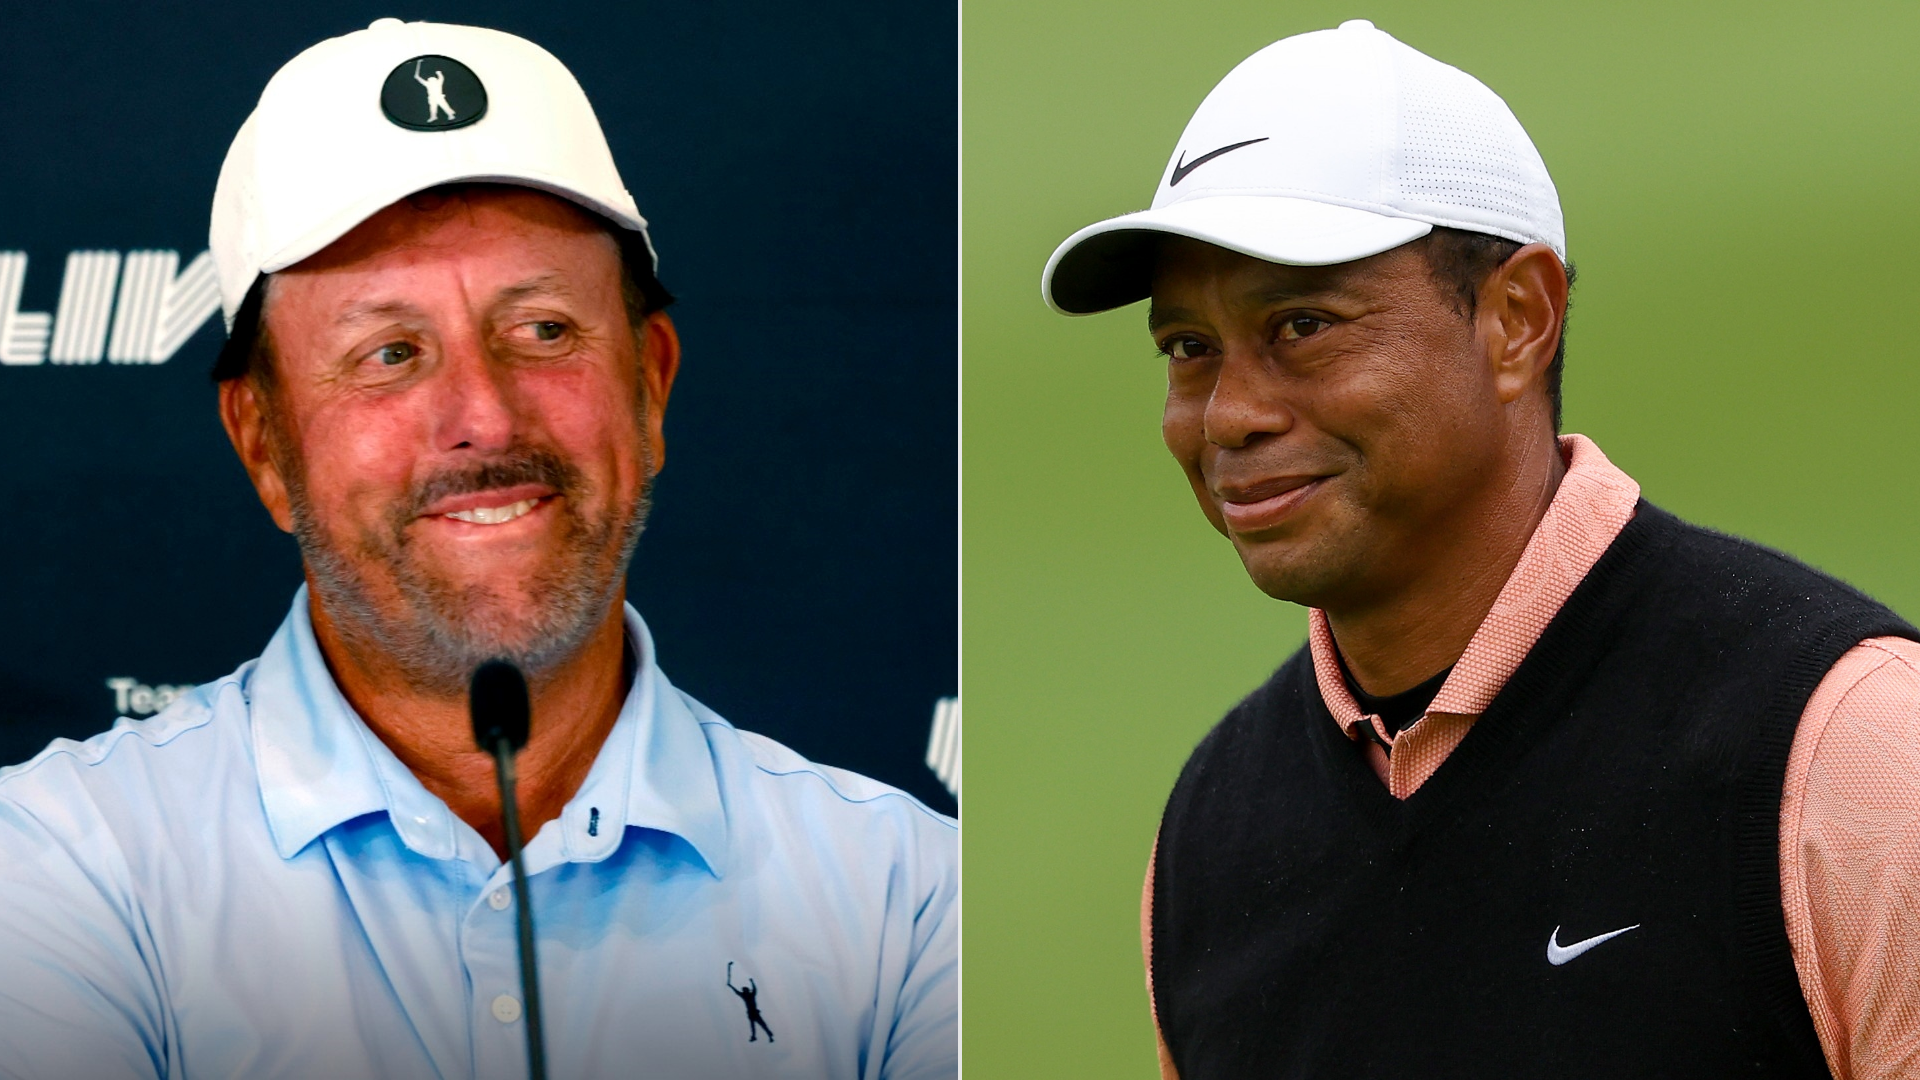 liv golf-pga tour merger winners and losers: phil mickelson wins big, tiger woods & pga tour lose out